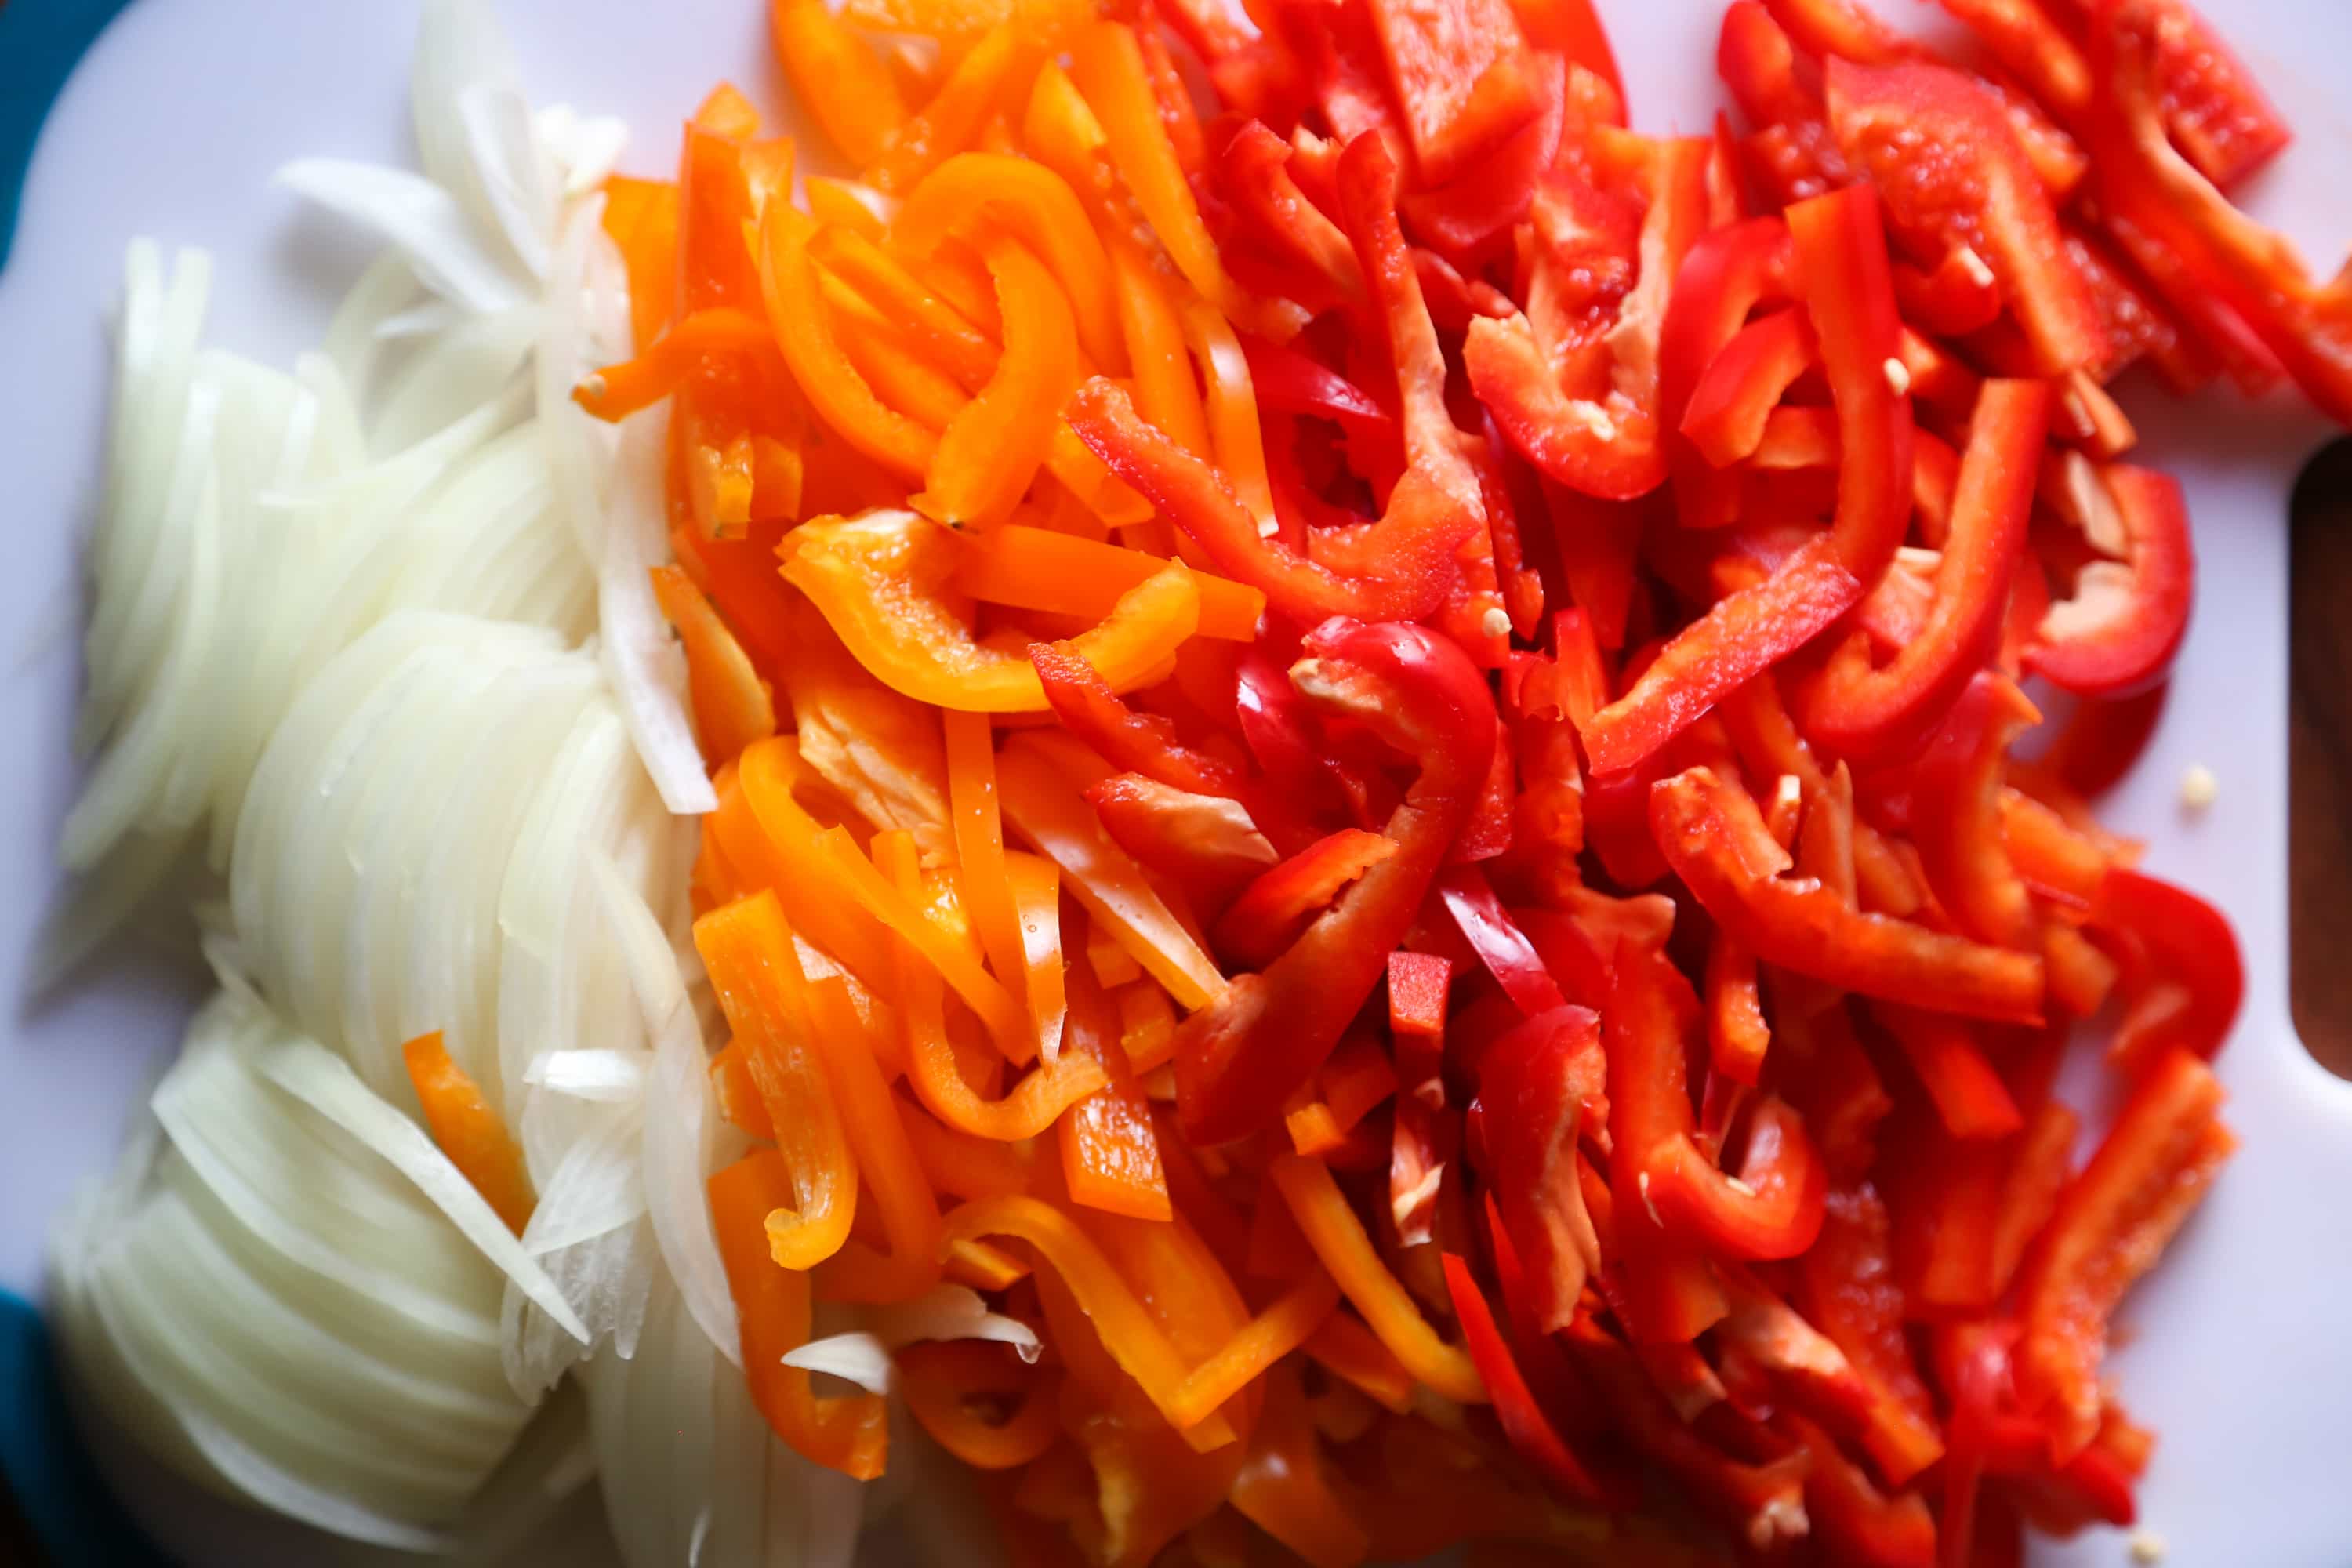 Chopped red bell peppers, orange bell peppers and onions on a plastic cutting board